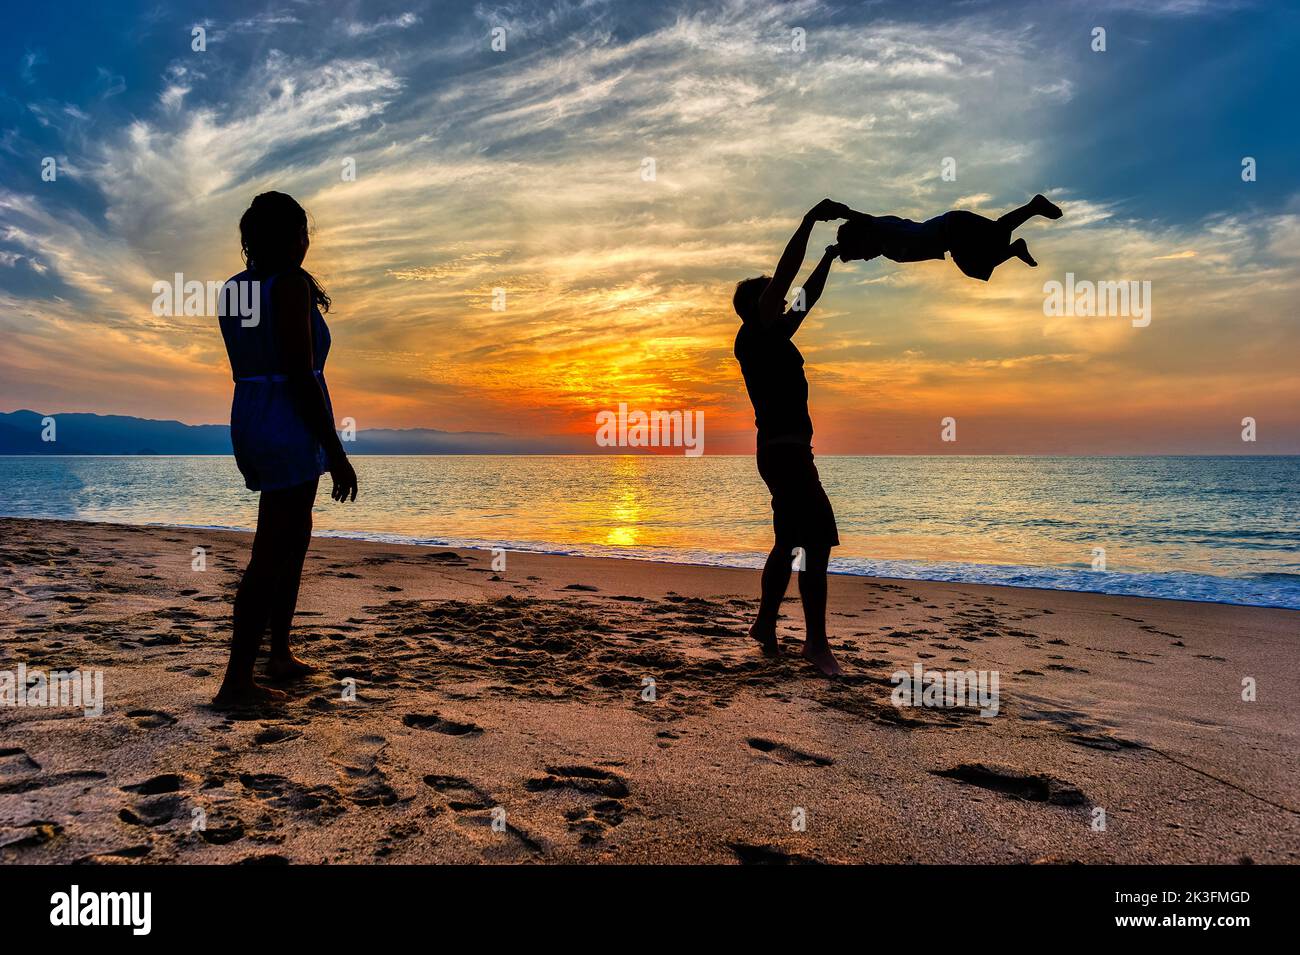 A Father is Playing With His Son On the beach As A Mother Watches On Stock Photo